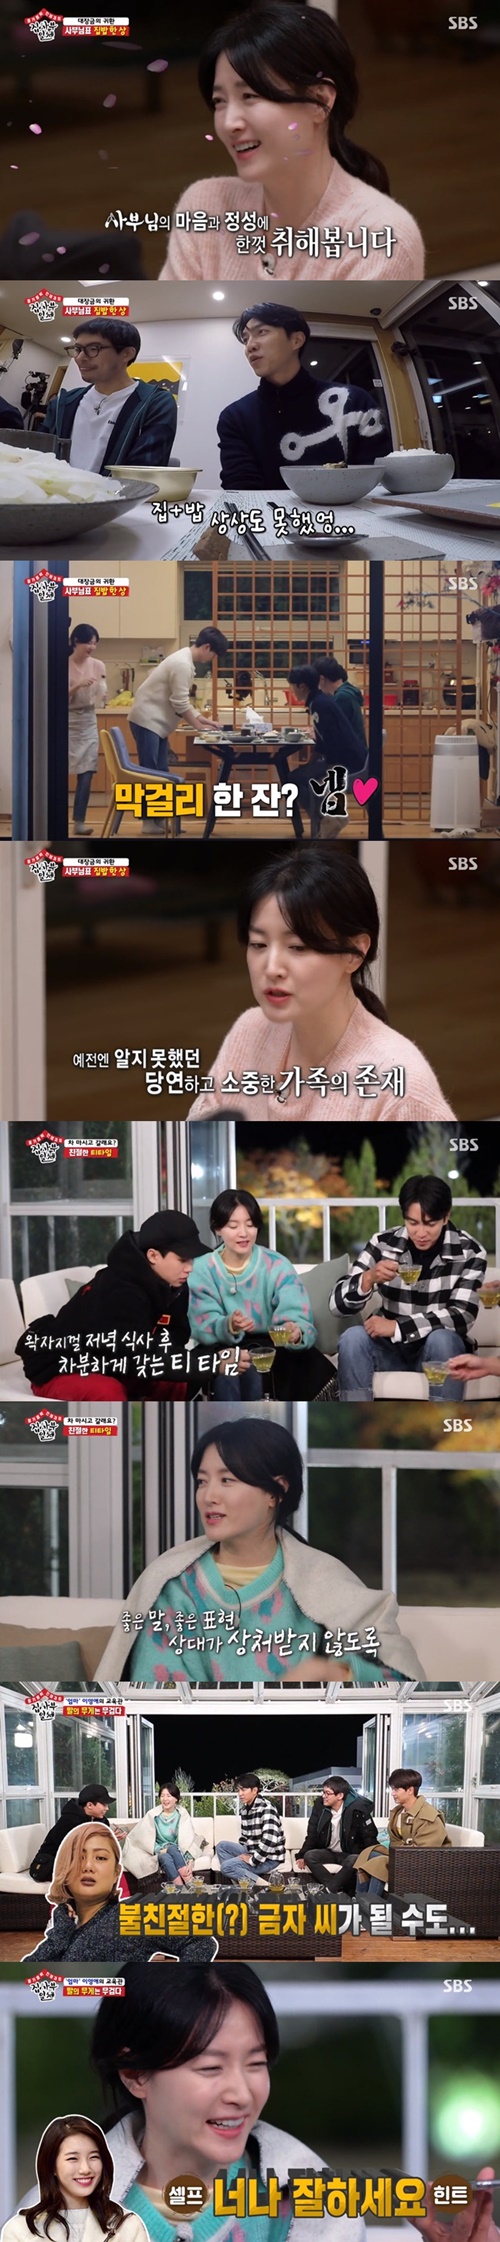 From the mention of Naraba by Lee Yeong-ae of All The Butlers to the notice of Master New Zealand was released.SBS All The Butlers broadcast on the last day was followed by a fun time with members, Master Lee Yeong-ae and children after last week.After completing an interesting class with Master Lee Yeong-aes children, the rising figure gathered at the table to eat the rice cooked by the master.Lee Yeong-ae recommended a grass of makgeolli, and Lee Seung-gi was surprised that until this morning I could not imagine eating makgeolli at Master Lee Yeong-aes house.The members chatted with Master Lee Yeong-aes own oyster cabbage soup, cabbage and Yang Se-hyeong, deliciously eating the radish made with the recipe of the master.Asked about his daily routine, Master Lee Yeong-ae said, I am the same.I feel more precious about my family because I got married late, he said. Im married late in the day, and Im not married at all.Then, when asked if he had any fear of marriage, he replied, There was no such thing as a problem in my 20s and 30s, but the more I thought about making my roots, the harder I ran.When the members asked what work was rooted, they answered unexpectedly that the works that failed and ended early became nourishing.In teatime after the meal, Master Lee Yeong-ae emphasized the importance of praise.She told her children that she was most pleased with the praise of the children that the food she gave her mother was delicious, saying, I love you, thank you when she met with the children.The members decided to have time to call their acquaintances and give praise.Yang Se-hyeong showed a warm appearance to Park Na-rae, Lee Seung-gi called Suzie and handed her a compliment that was not so good.In particular, when Master Lee Yeong-ae said in a telephone conversation with Park Na-rae, Please invite me to Naraba, Park Na-rae said, If you come to our house, you can become an unfriendly gold seed.On the other hand, at the end of the broadcast, the members were drawn to New Zealand to meet the next master.Prior to the full-scale New Zealand row, the members sat in front of the VR karaoke device to perform the mission delivered by the next master.Lee Seung-gi counted 99 copies in the mission to write VR masks, sing songs, and count 100 bills, and won the first place with the opening of the New Zealand and pocket money.And expectations have risen for the thrilling appearance of the members leaving for New Zealand.